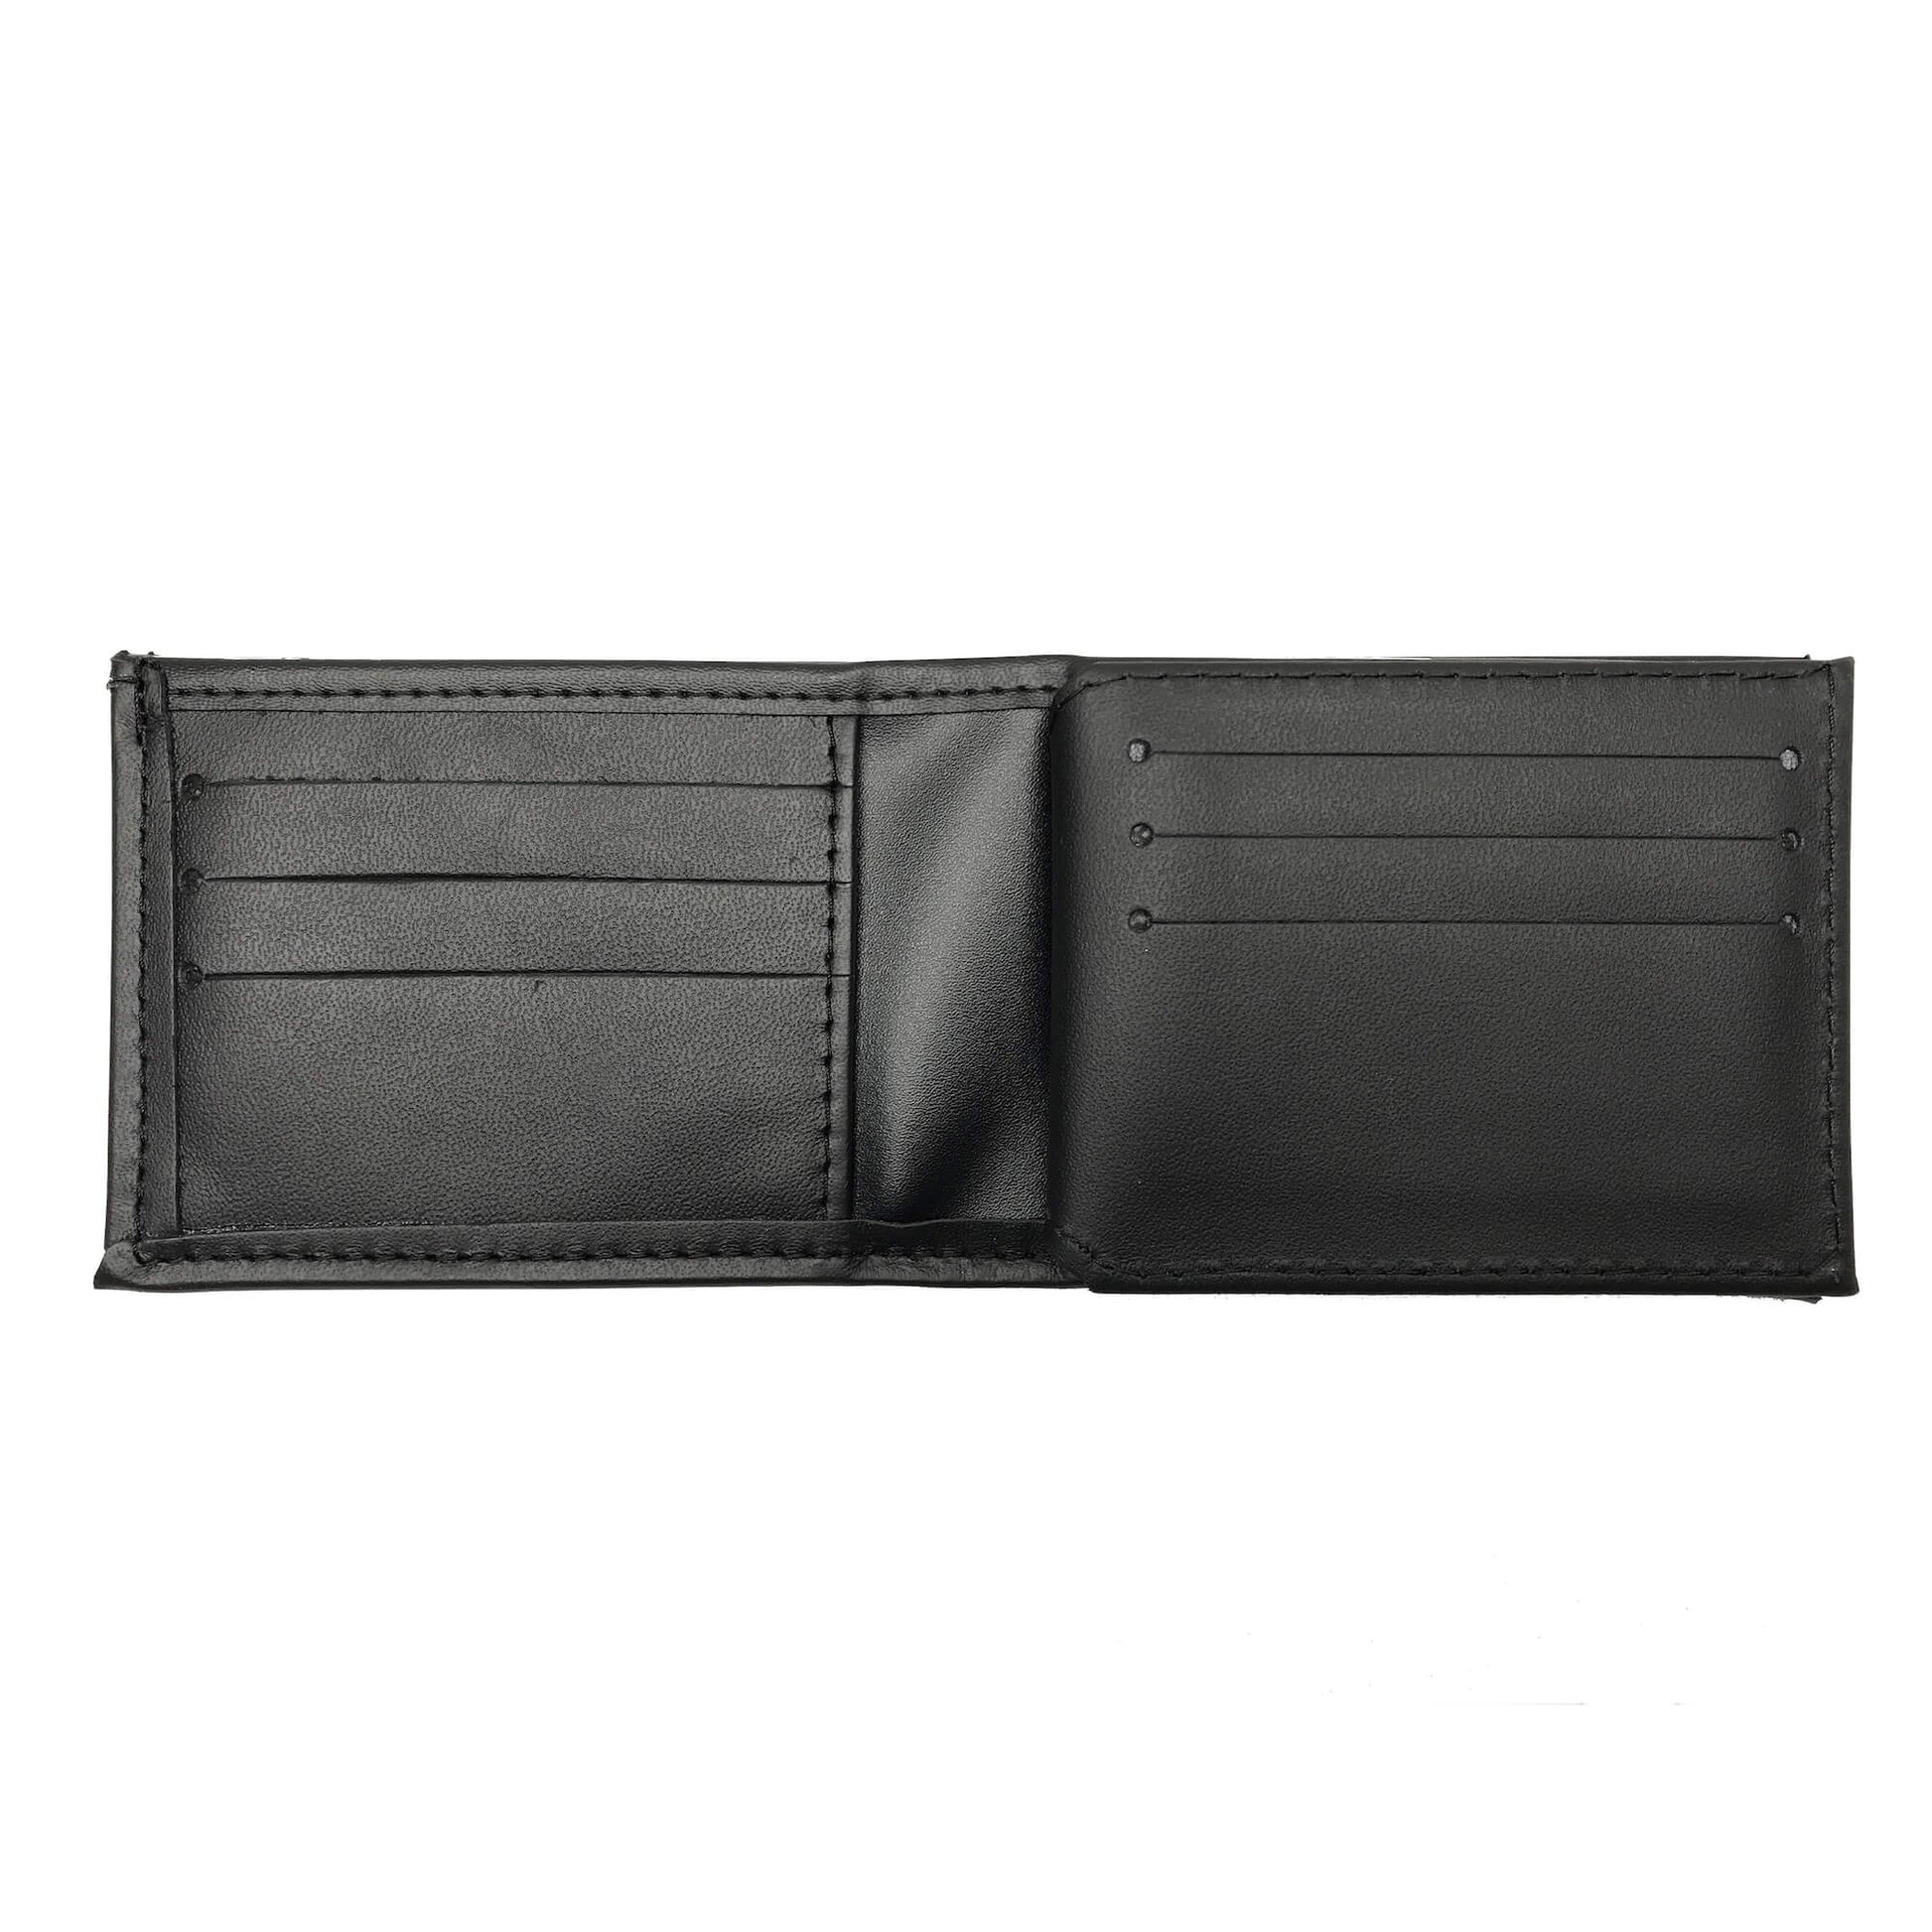 Royal Canadian Mounted Police (RCMP) Hidden Badge Wallet-Perfect Fit-911 Duty Gear Canada